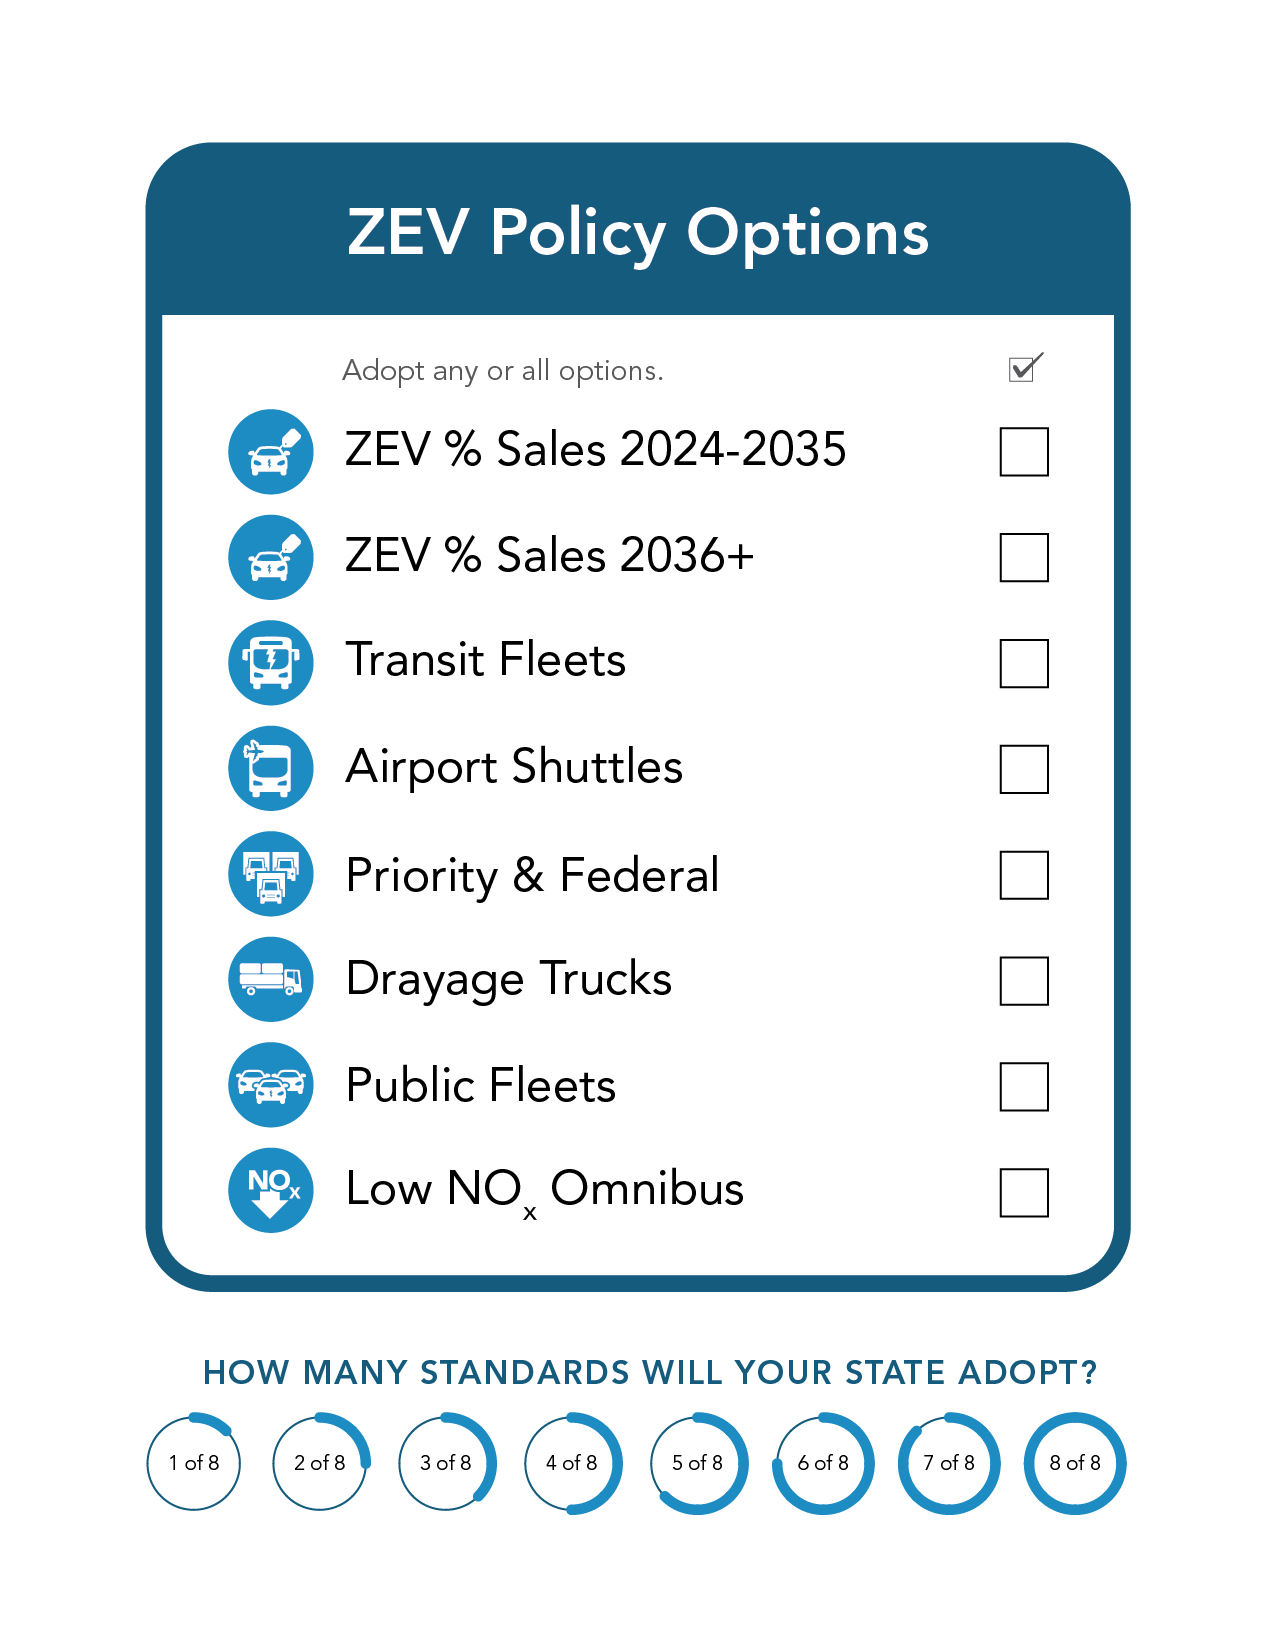 ZEV Policy options checklist: ZEV % Sales 2024-2039. ZEV % Sales 2036+. Transit Fleets. Airport Shuttles. Priority & Federal. Drayage Trucks. Public Fleets. Low NOx Omnibus. How many standards will your state adopt? 